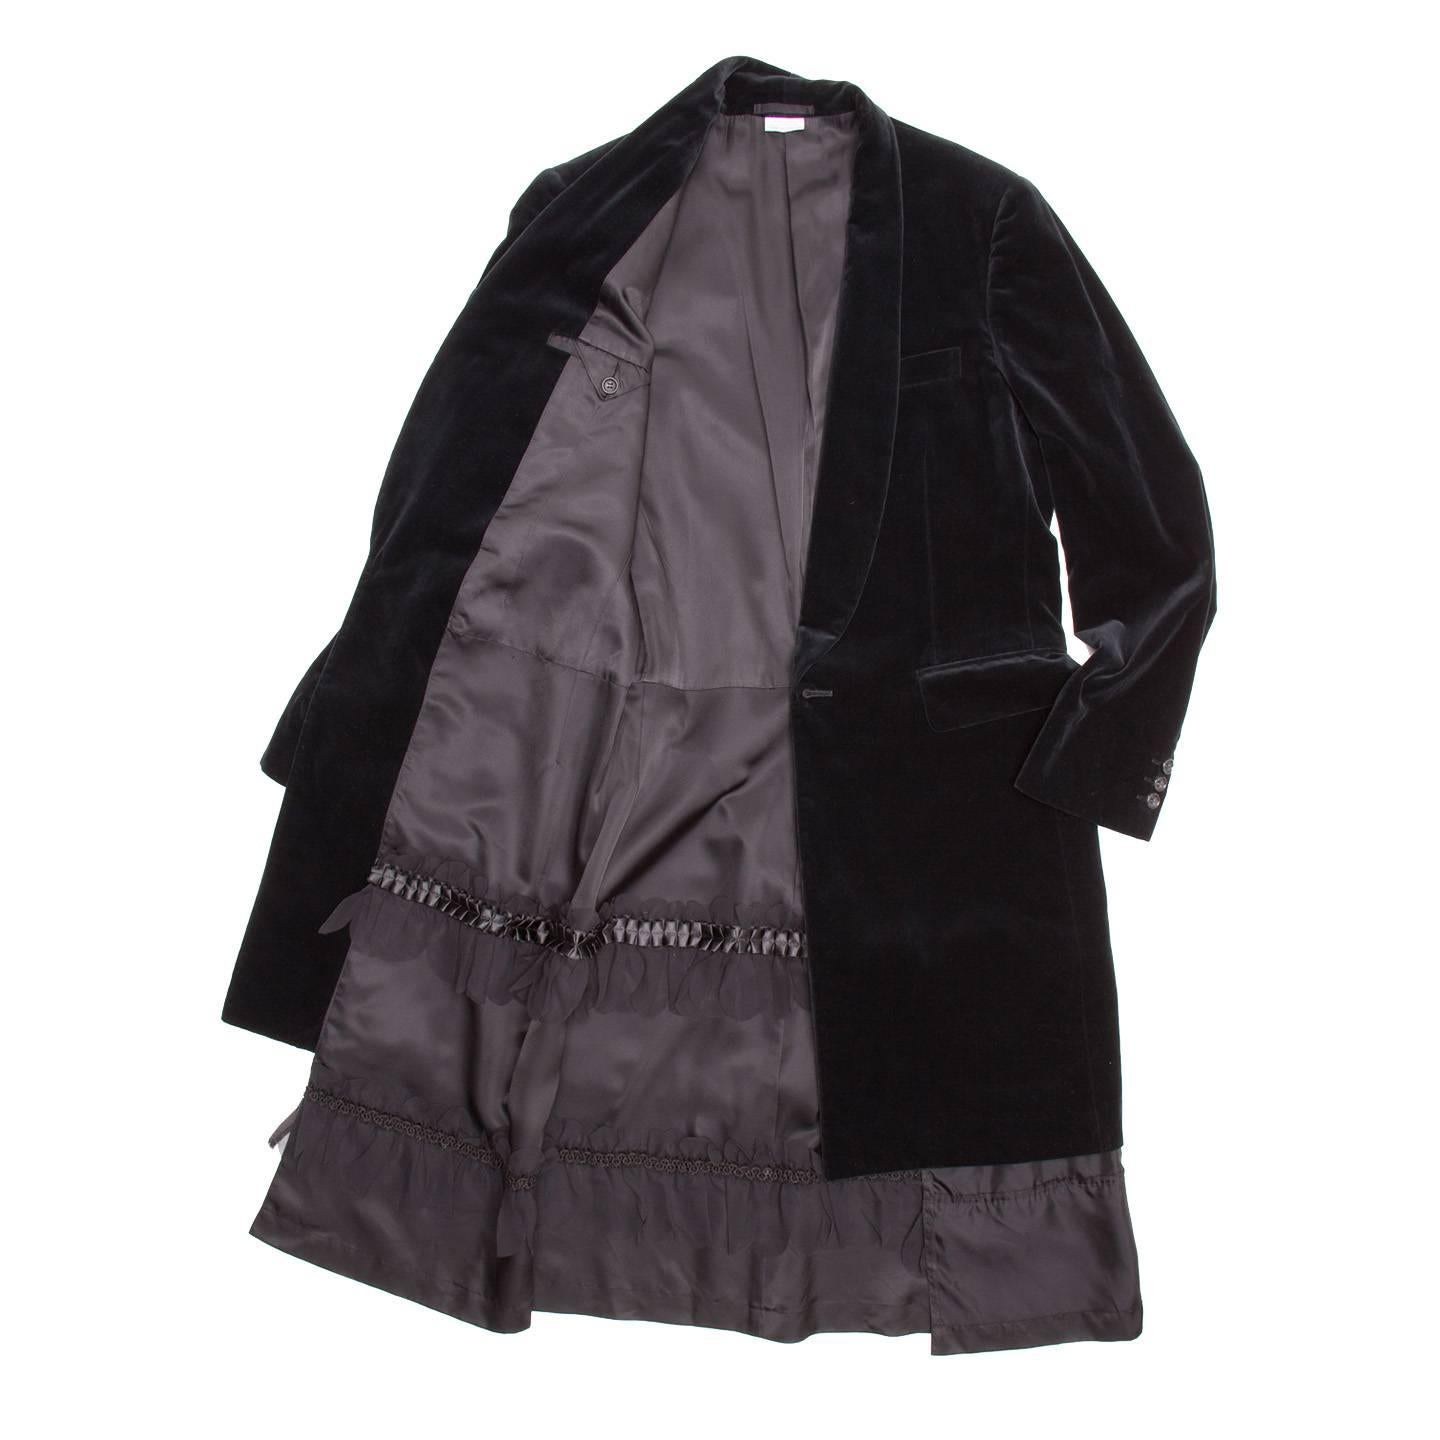 Comme des Garçons Black Velvet Coat In New Condition For Sale In Brooklyn, NY